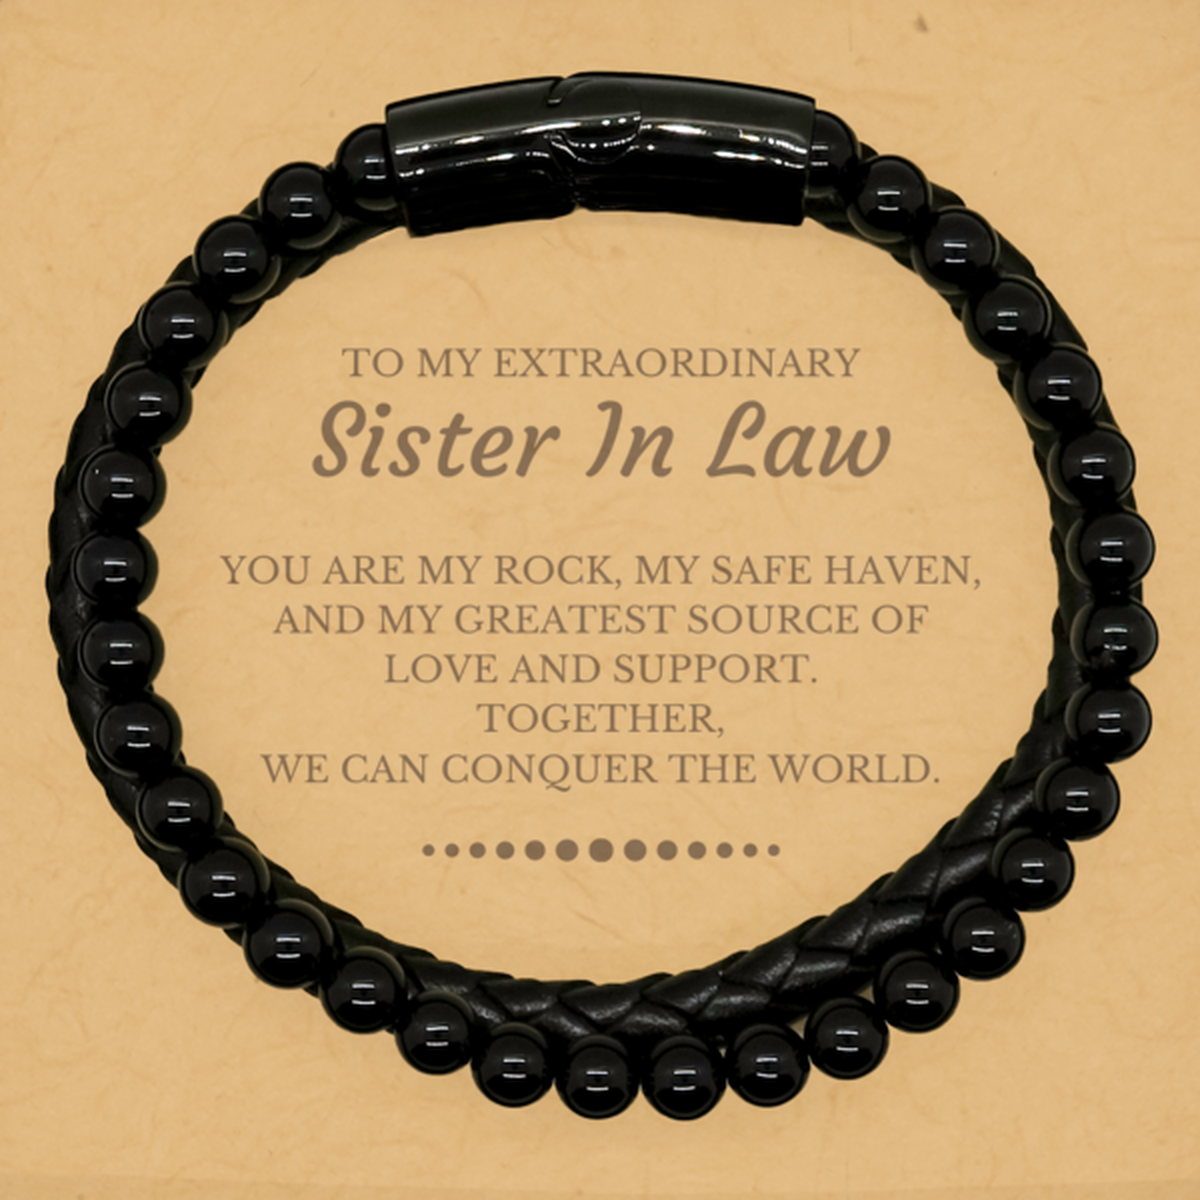 To My Extraordinary Sister In Law Gifts, Together, we can conquer the world, Birthday Stone Leather Bracelets For Sister In Law, Christmas Gifts For Sister In Law